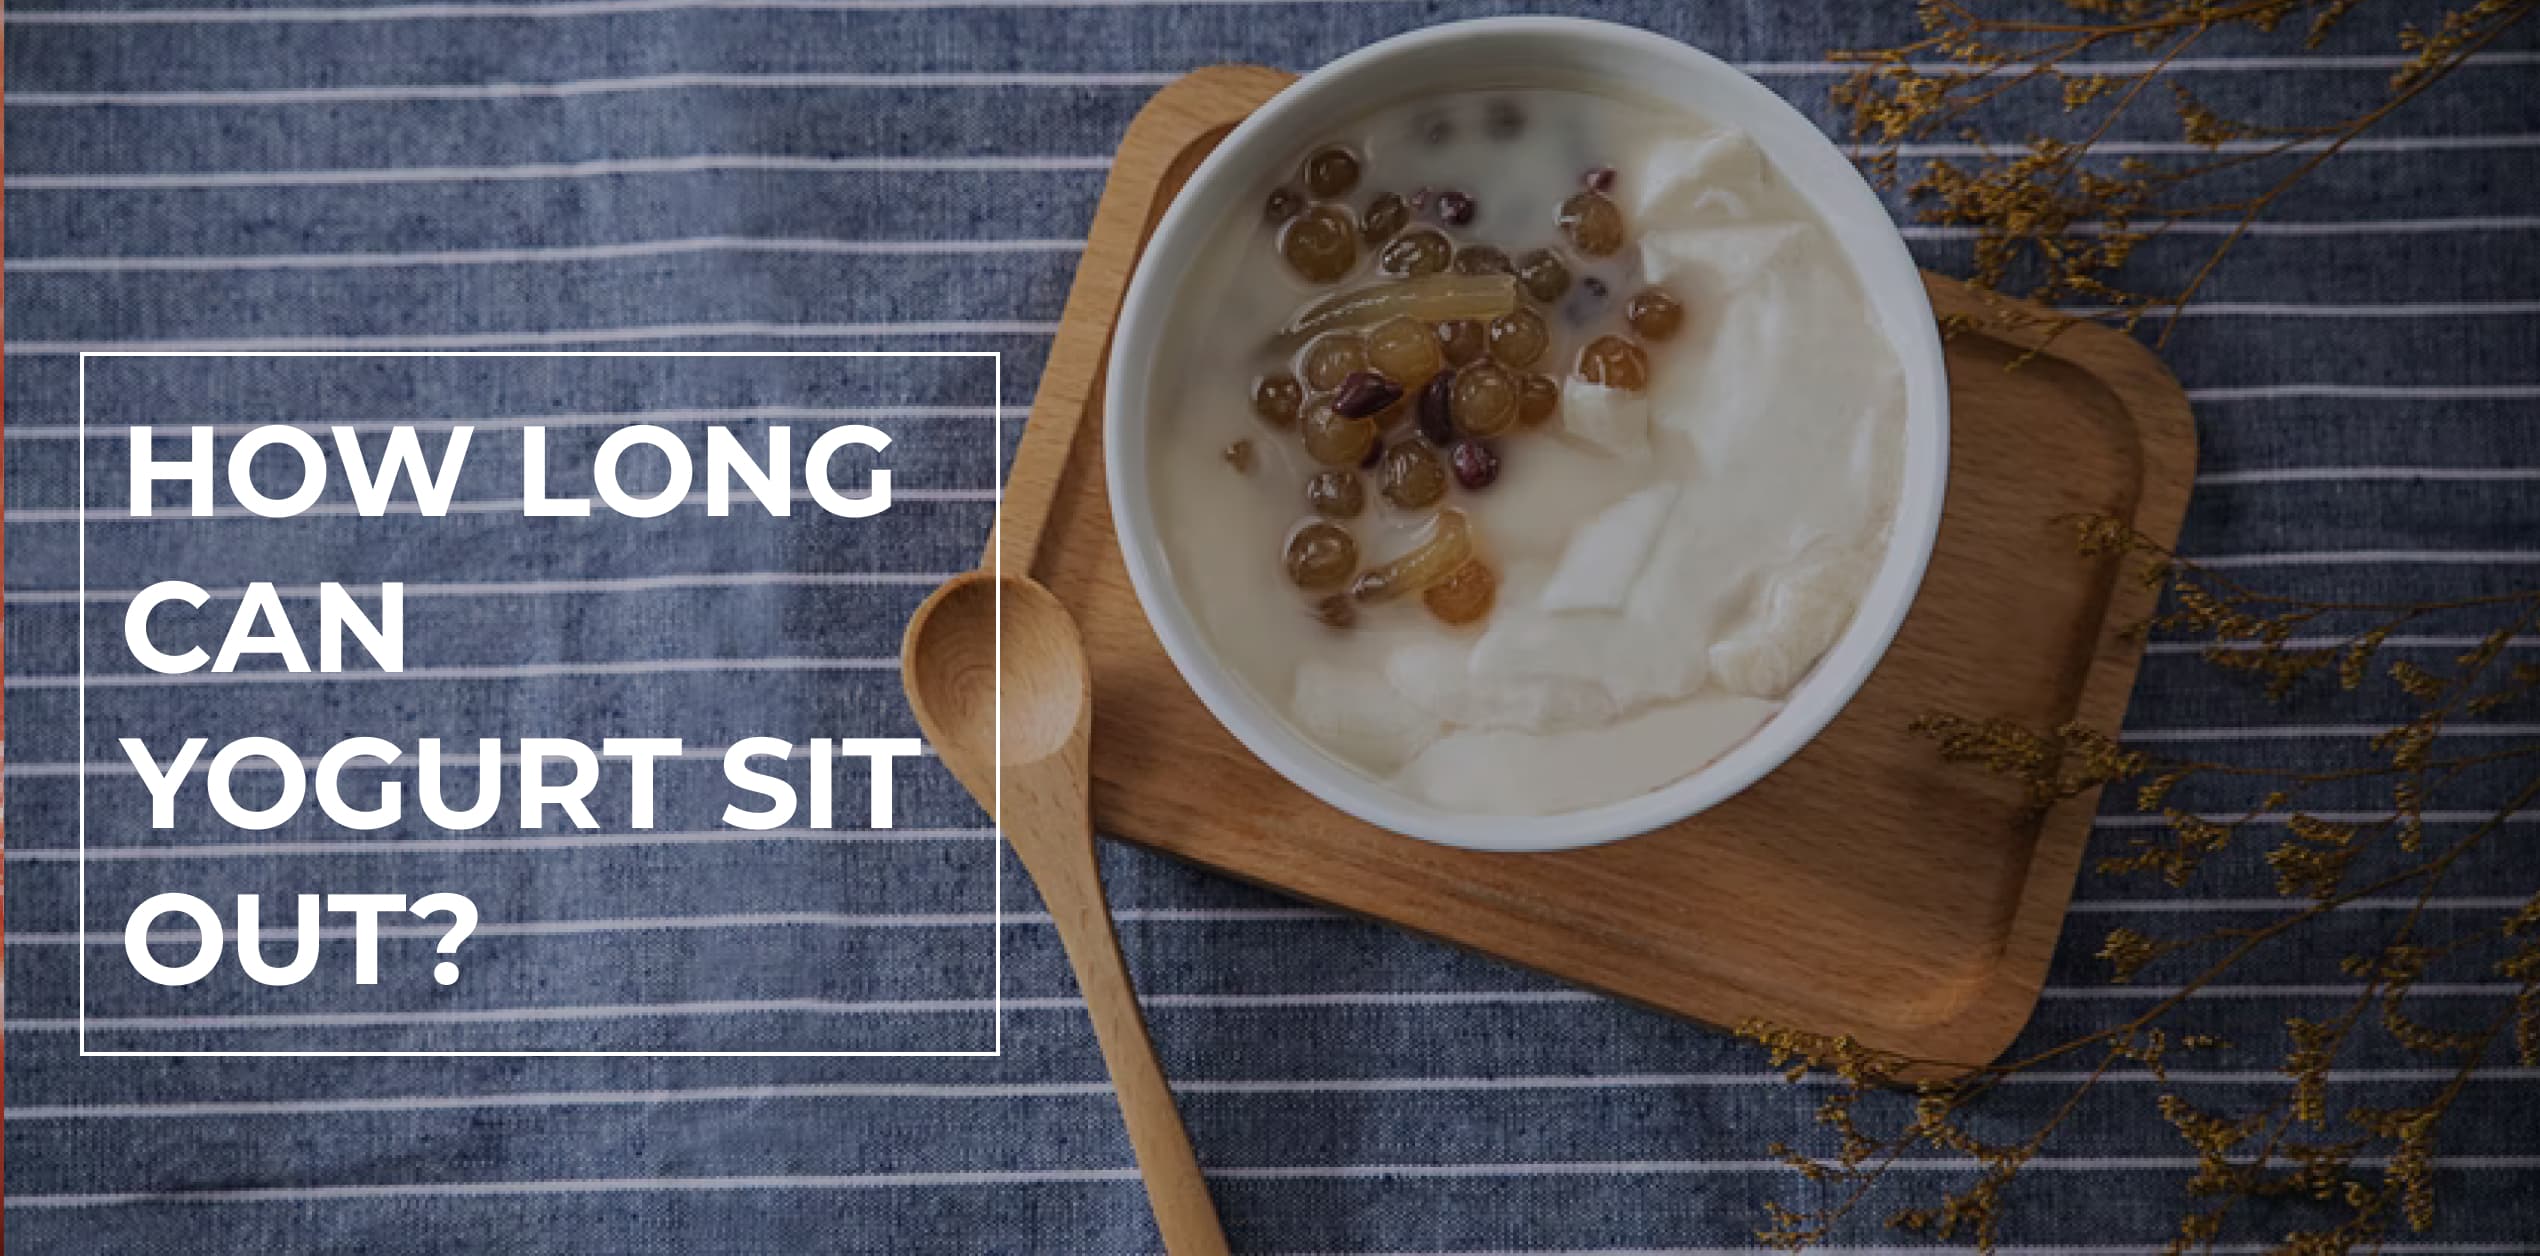 How Long Can Yogurt Sit Out